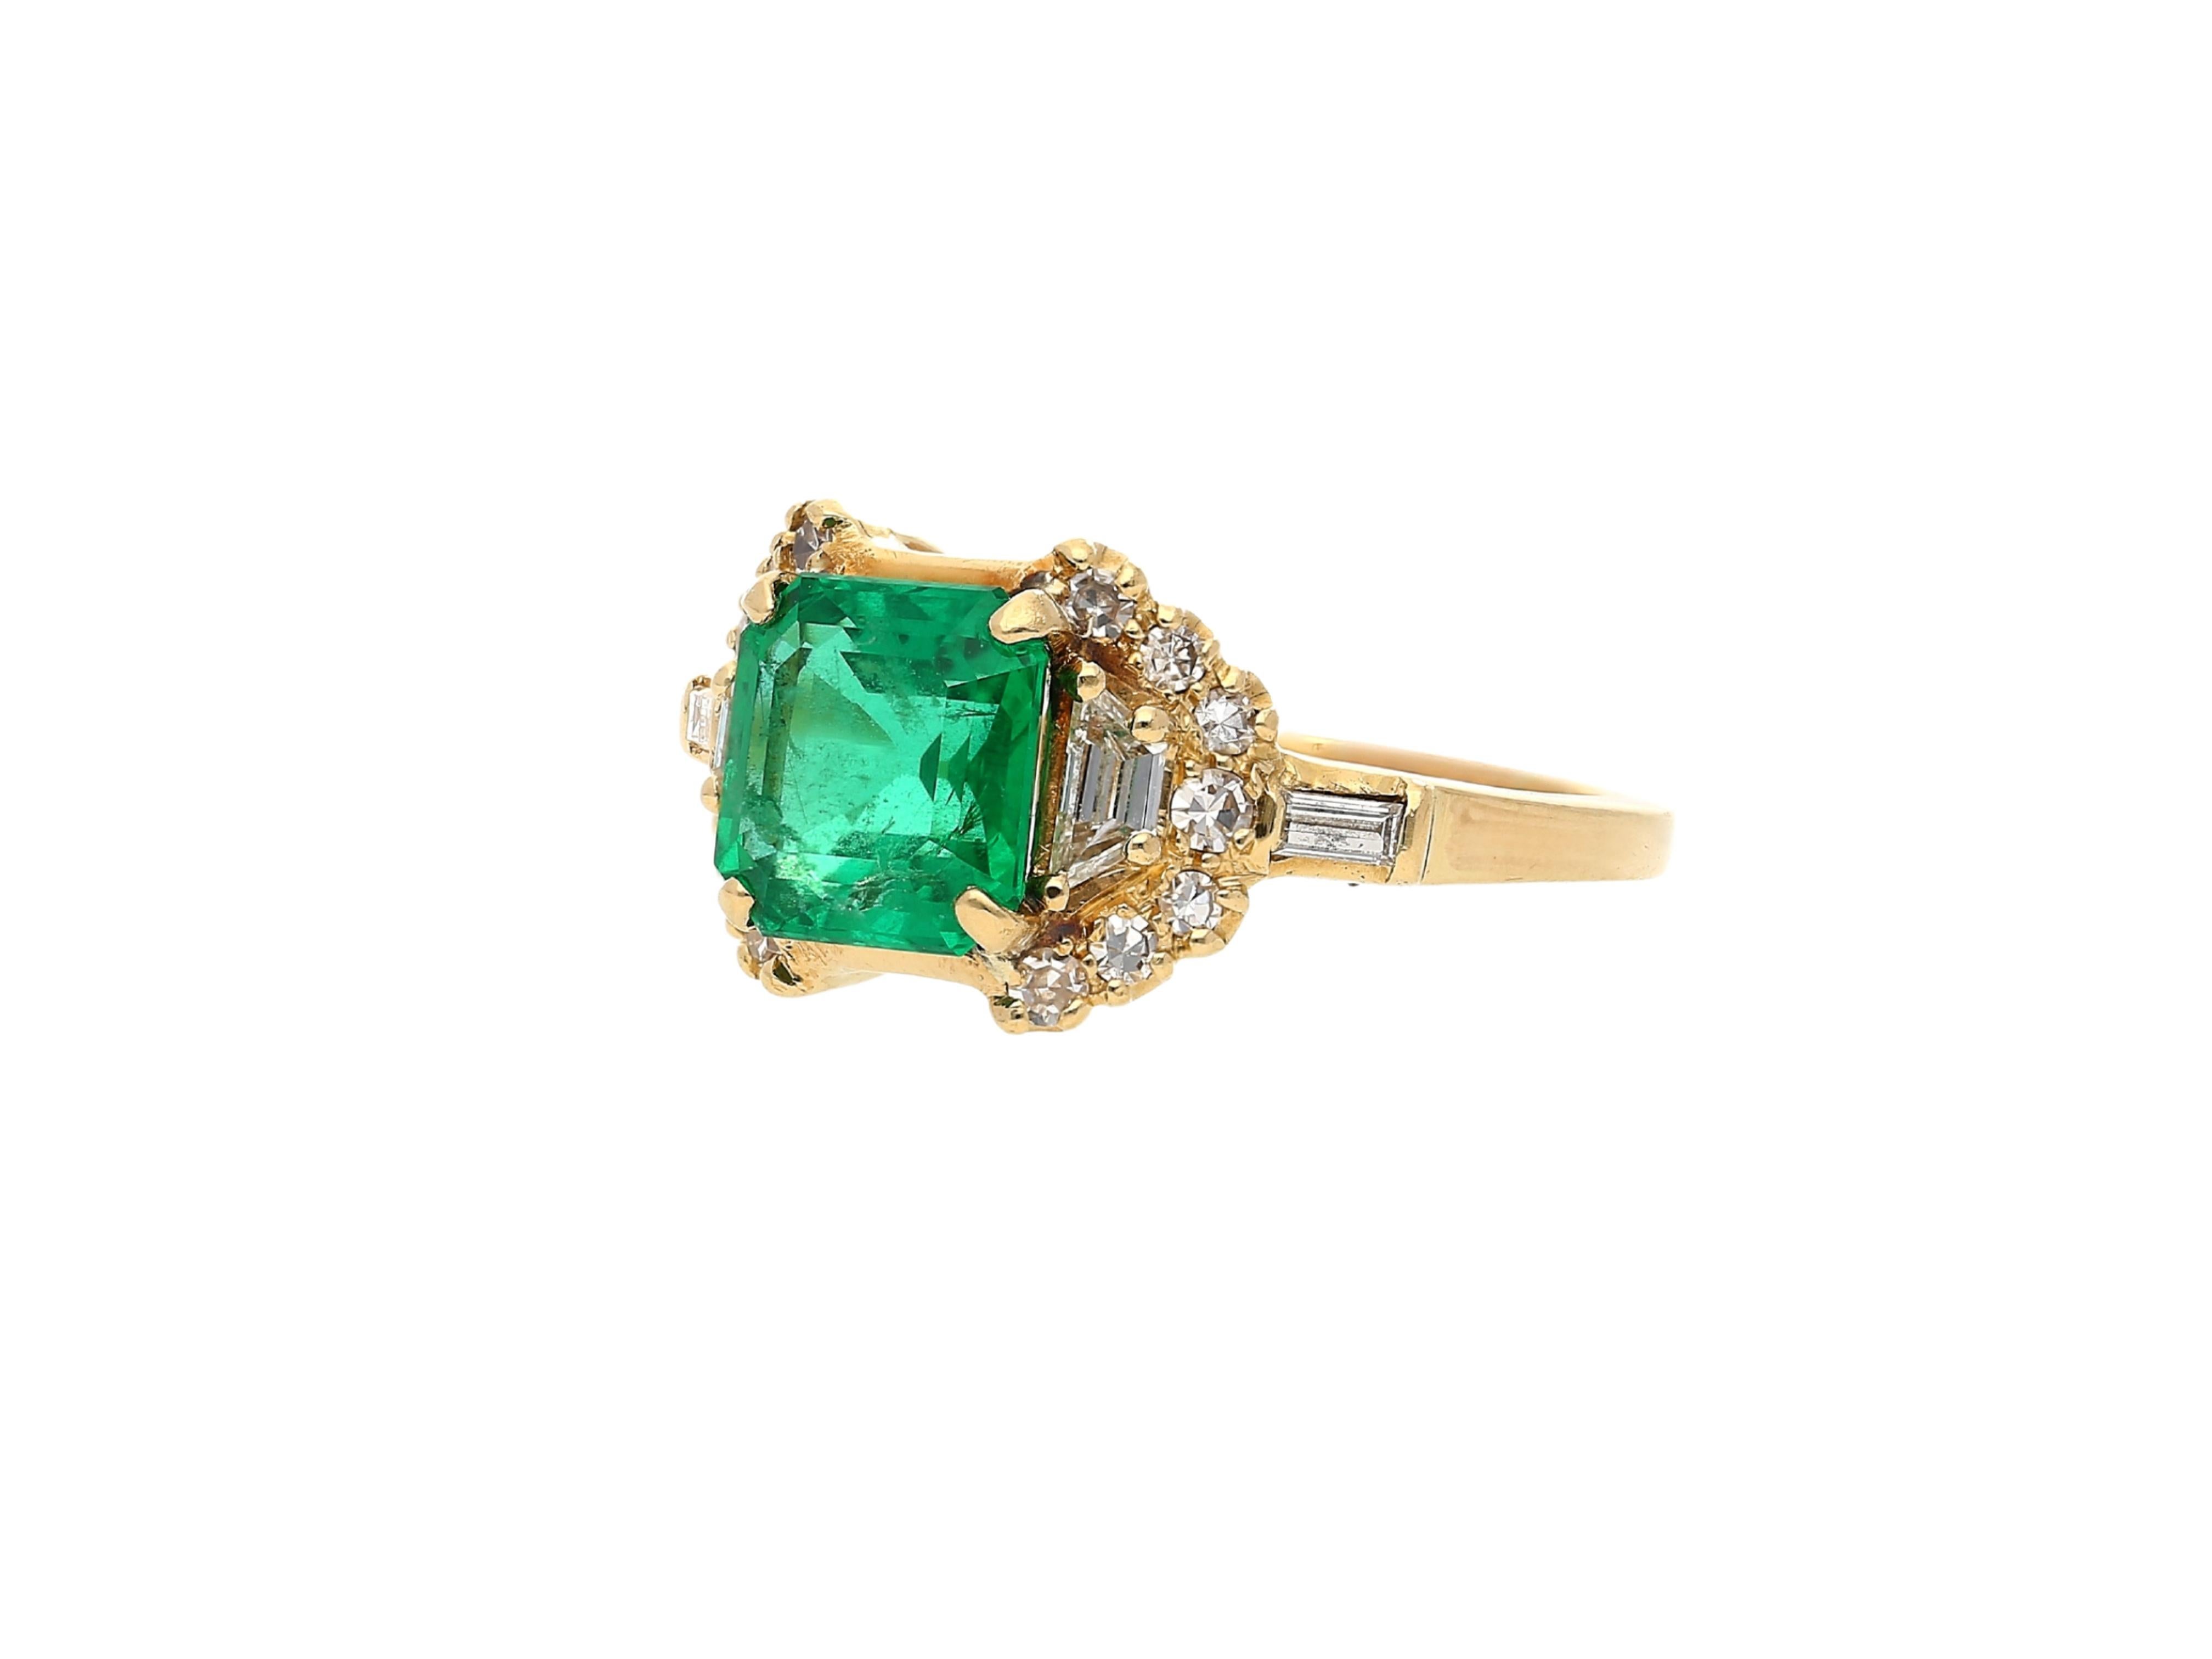 GRS certified natural Colombian Emerald mounted in a vintage art deco ring setting.

Ring Details: 
✔ Gold Karat: 18K 
✔ Ring Weight: 5.29 grams
✔ GRS certified 
✔ Circa 1990’s

Emerald Details: 
✔ Emerald Weight: 2.09 carats
✔ Emerald Origin: